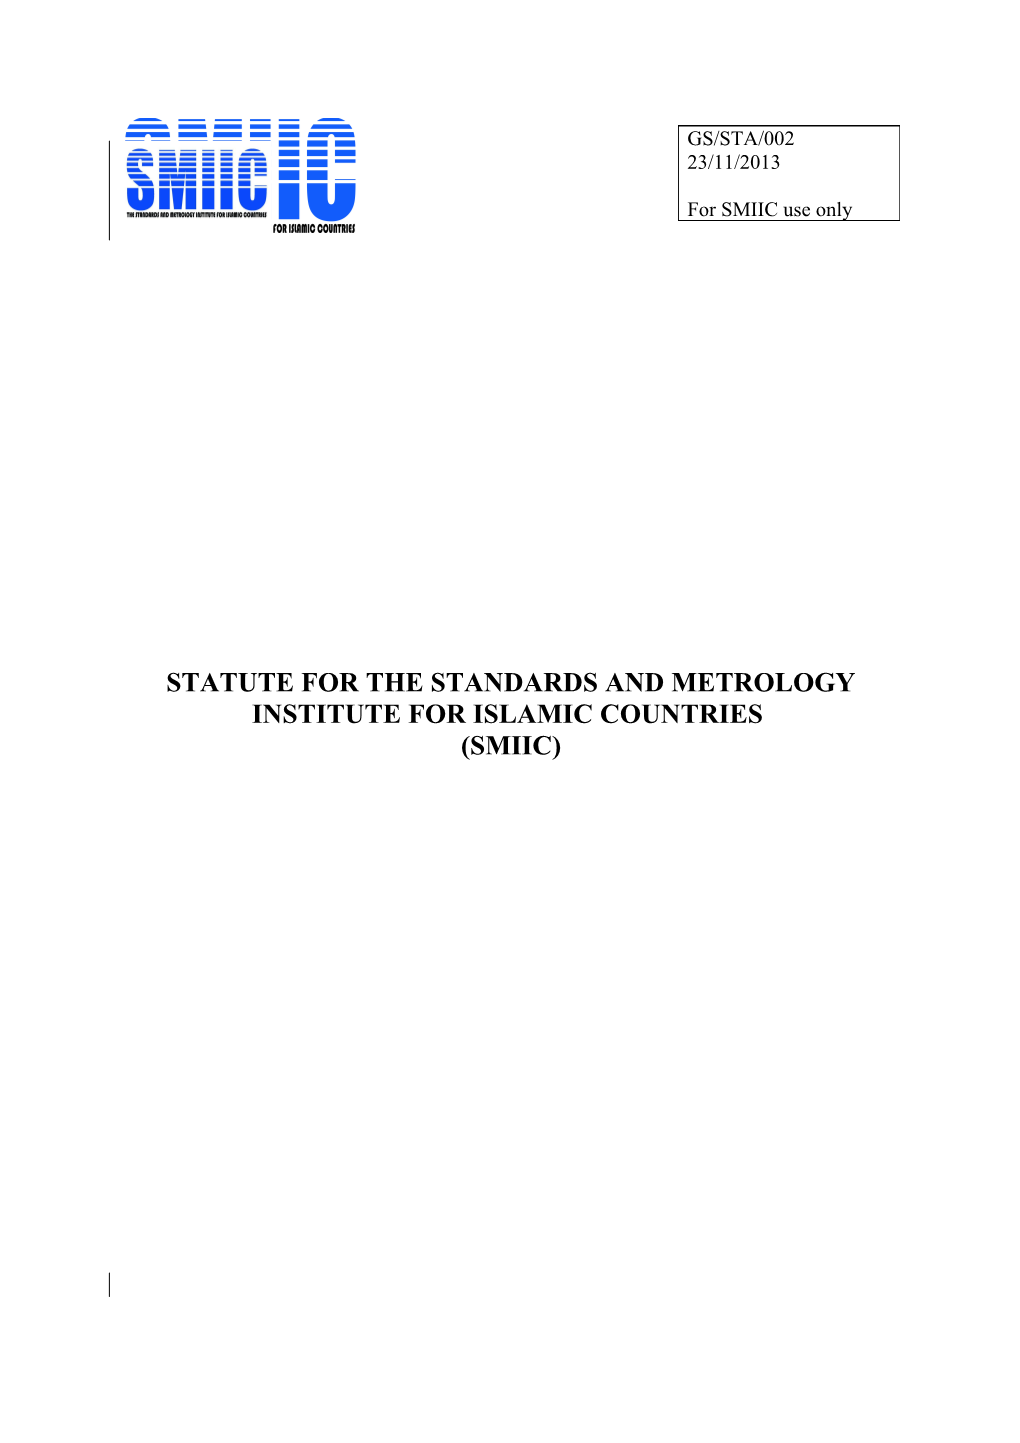 Statute for the Standards and Metrology Institutefor Islamic Countries